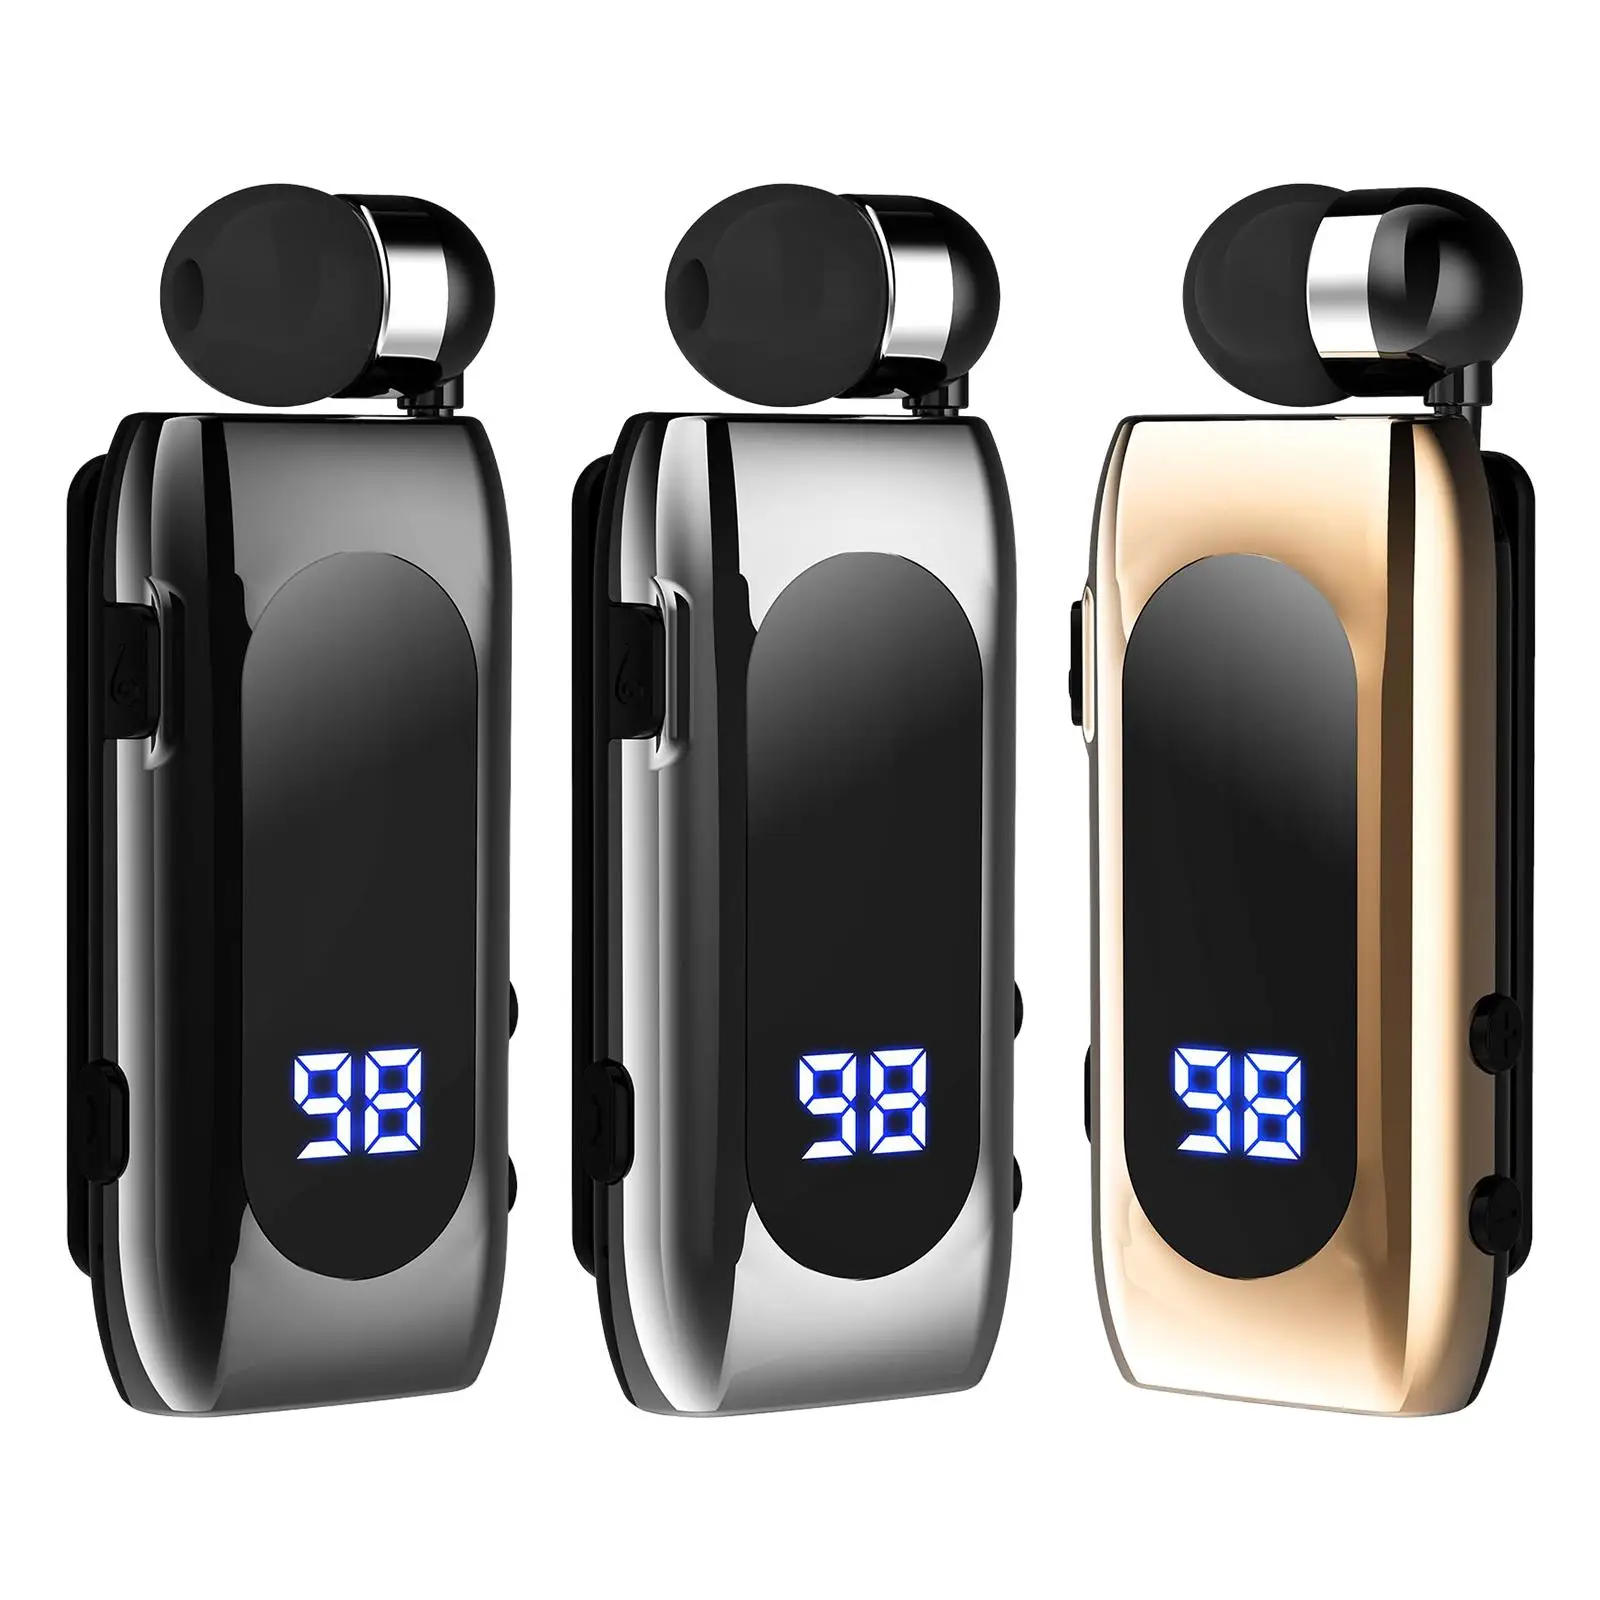 Bluetooth 5.2 Wireless Headphones Headset LED Display Clip Outdoor 20H Call Earplugs for Video Fitness Smart Phones Music Gaming